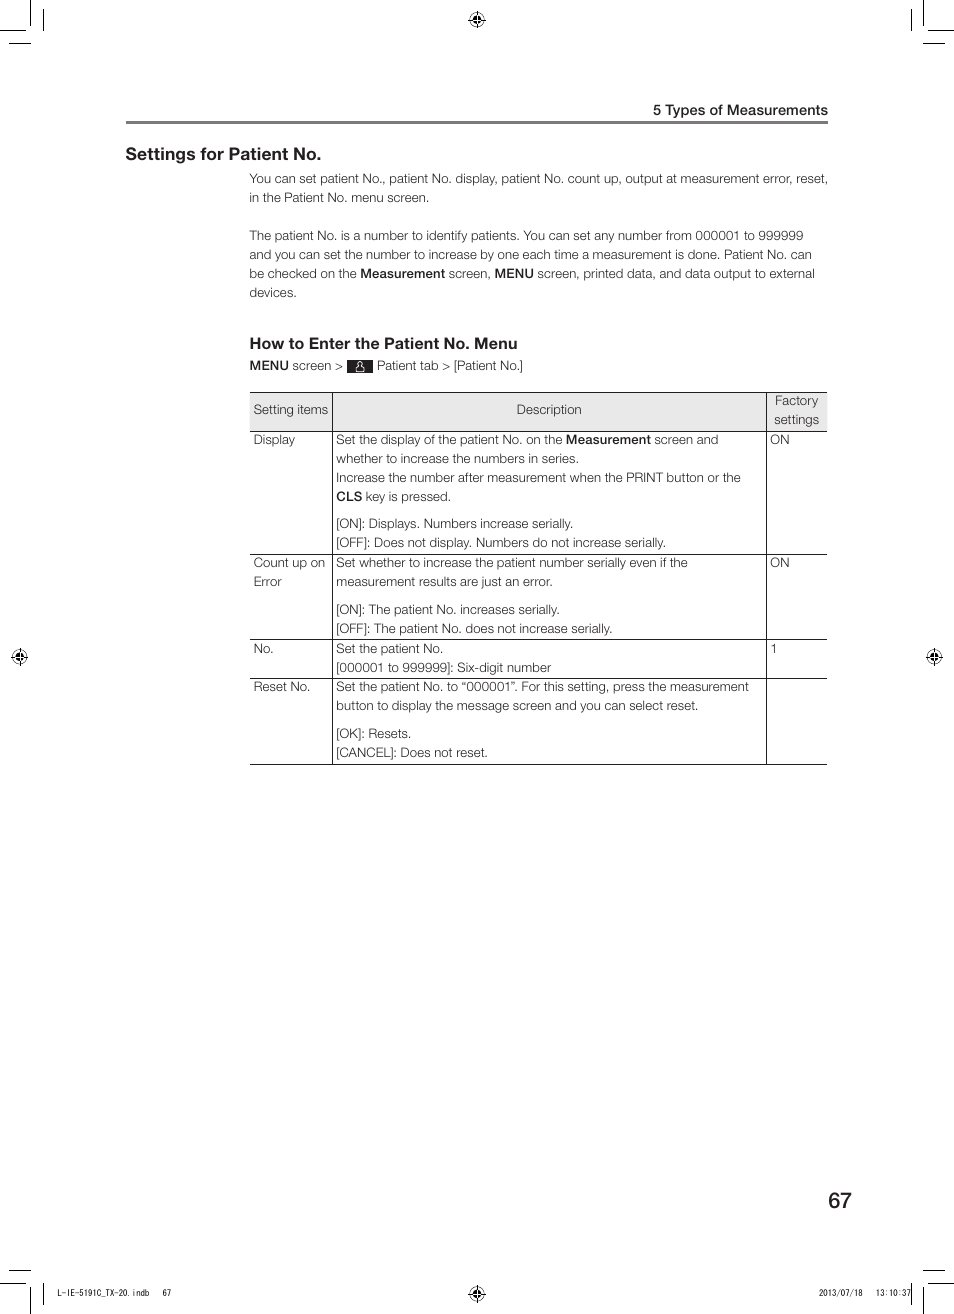 Settings for patient no | Canon TX-20 Full Auto Tonometer User Manual | Page 67 / 100